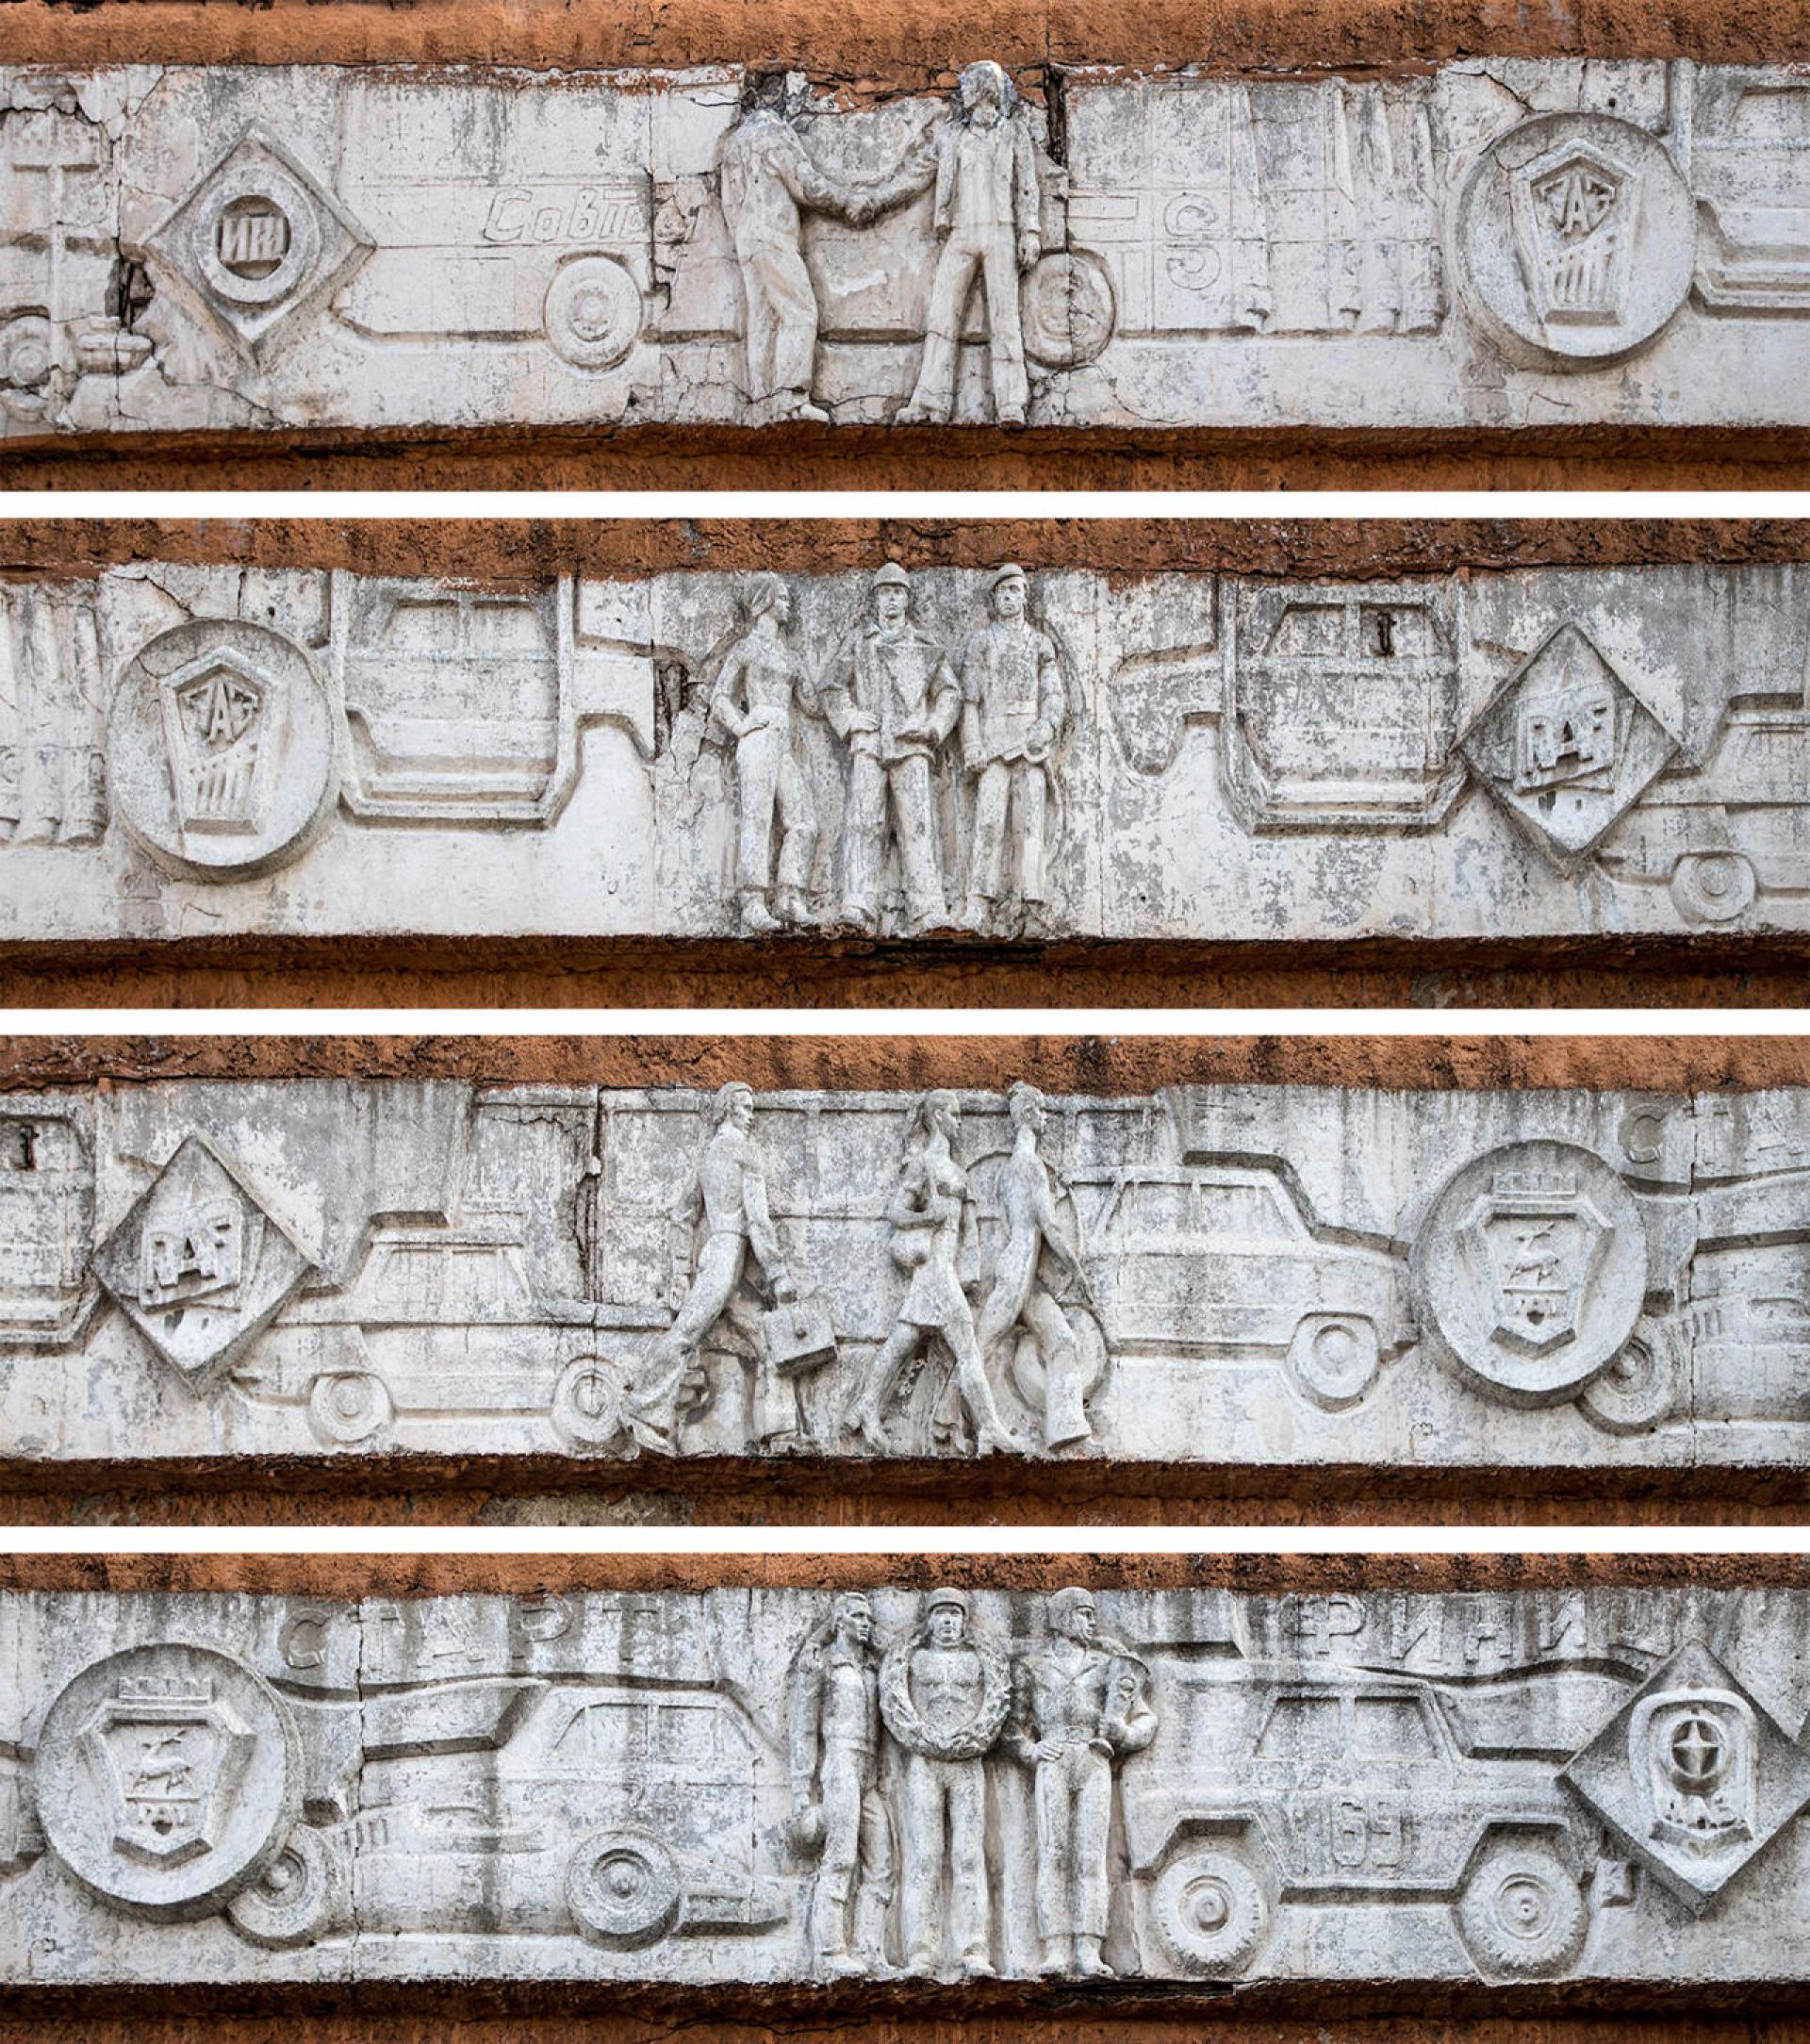 Details of the relief on the front of building showing staff, passengers, vehicles, and the logos of various automotive brands. | Photo © Darmon Richter